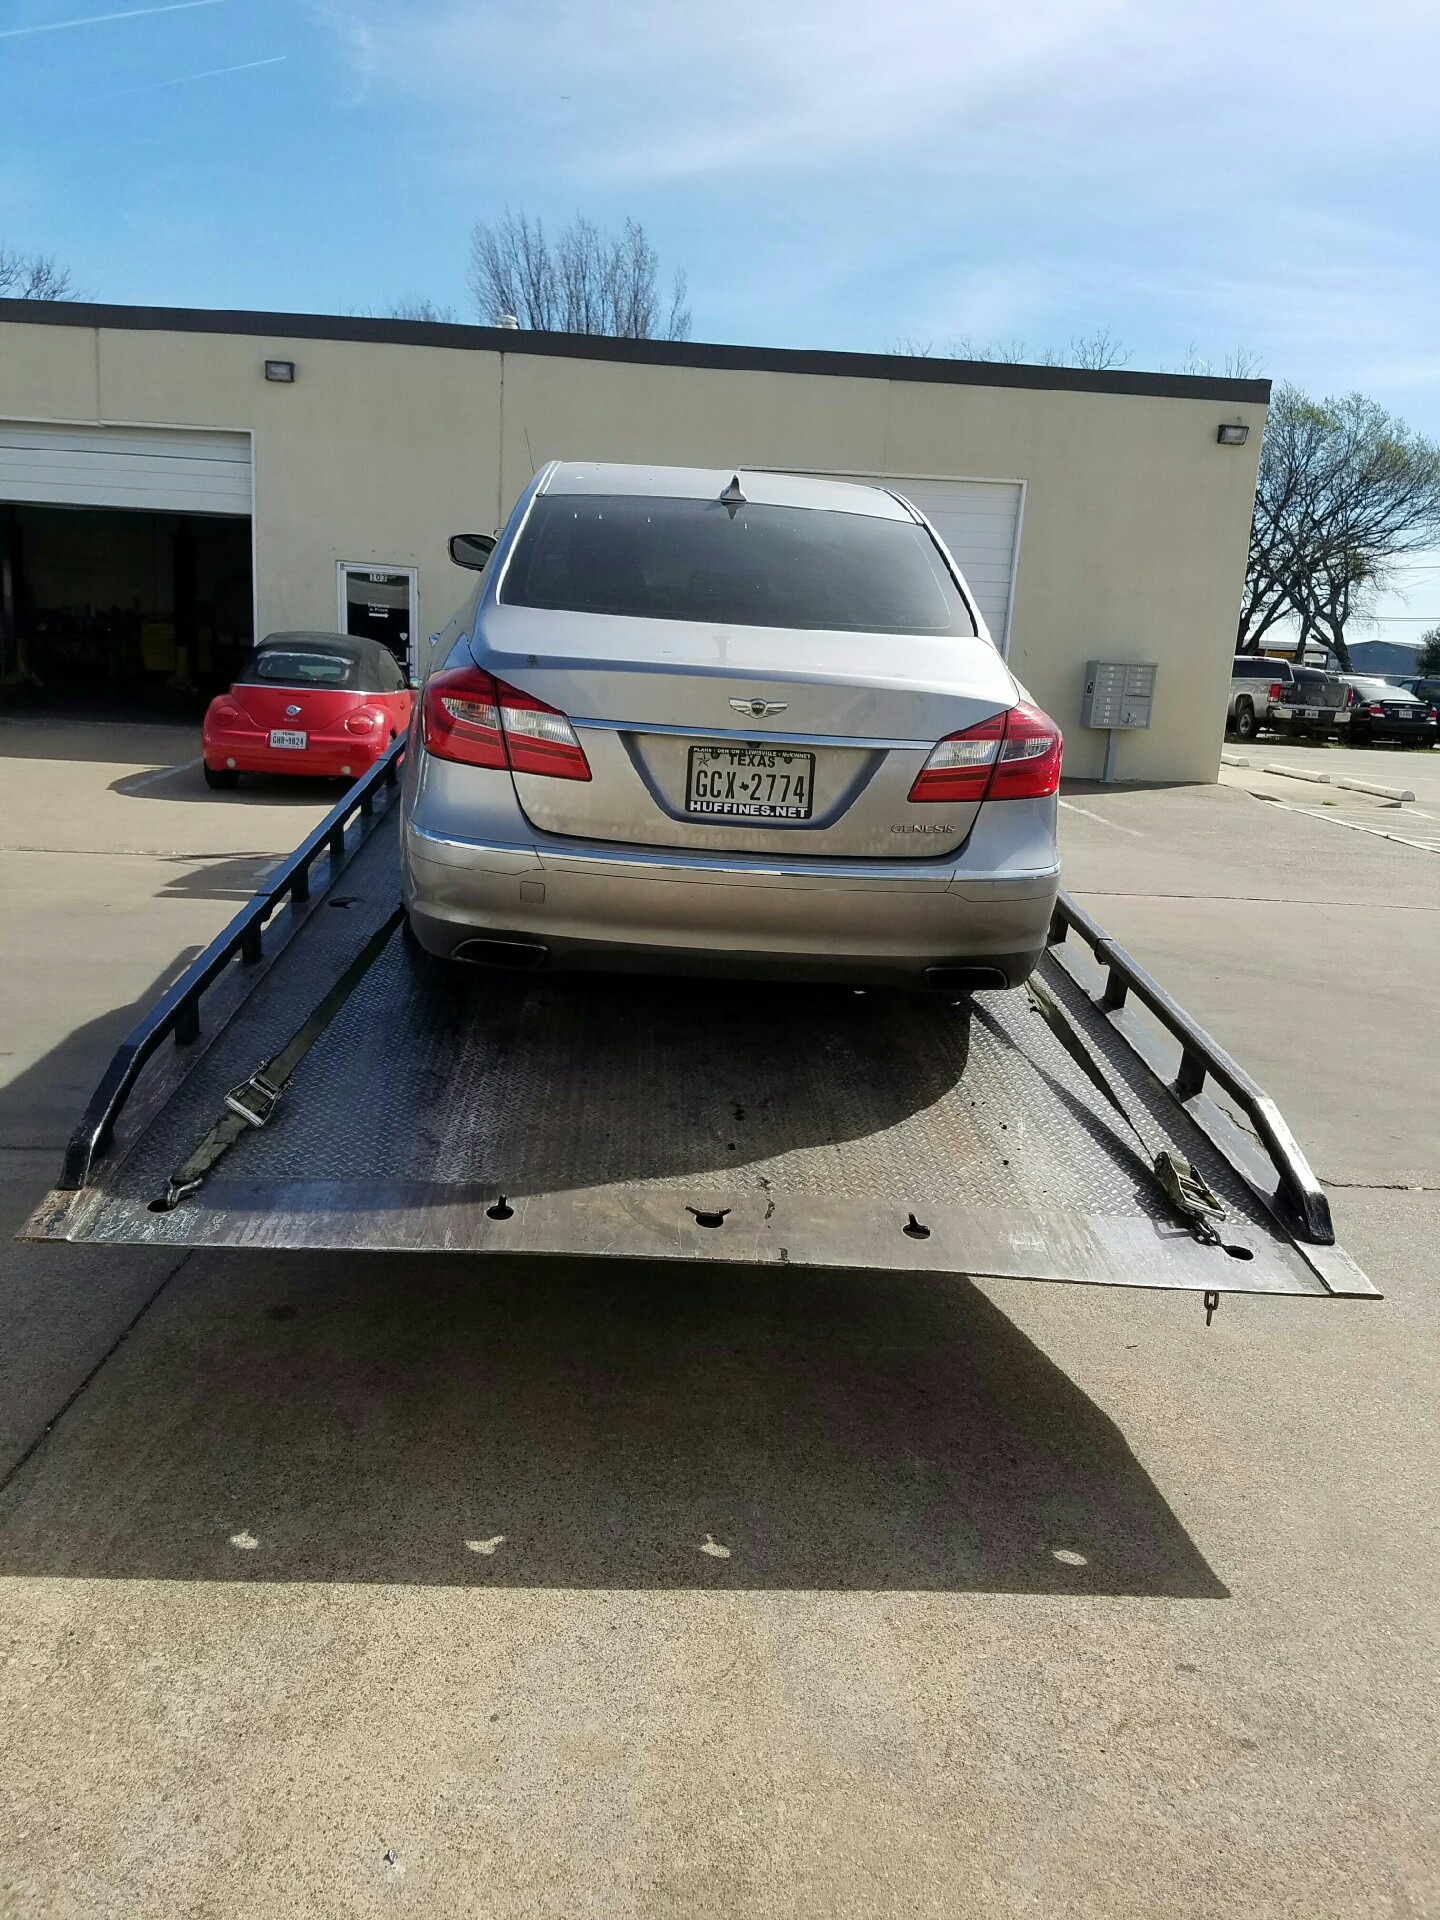 Citywide Towing Service of Dallas, TX